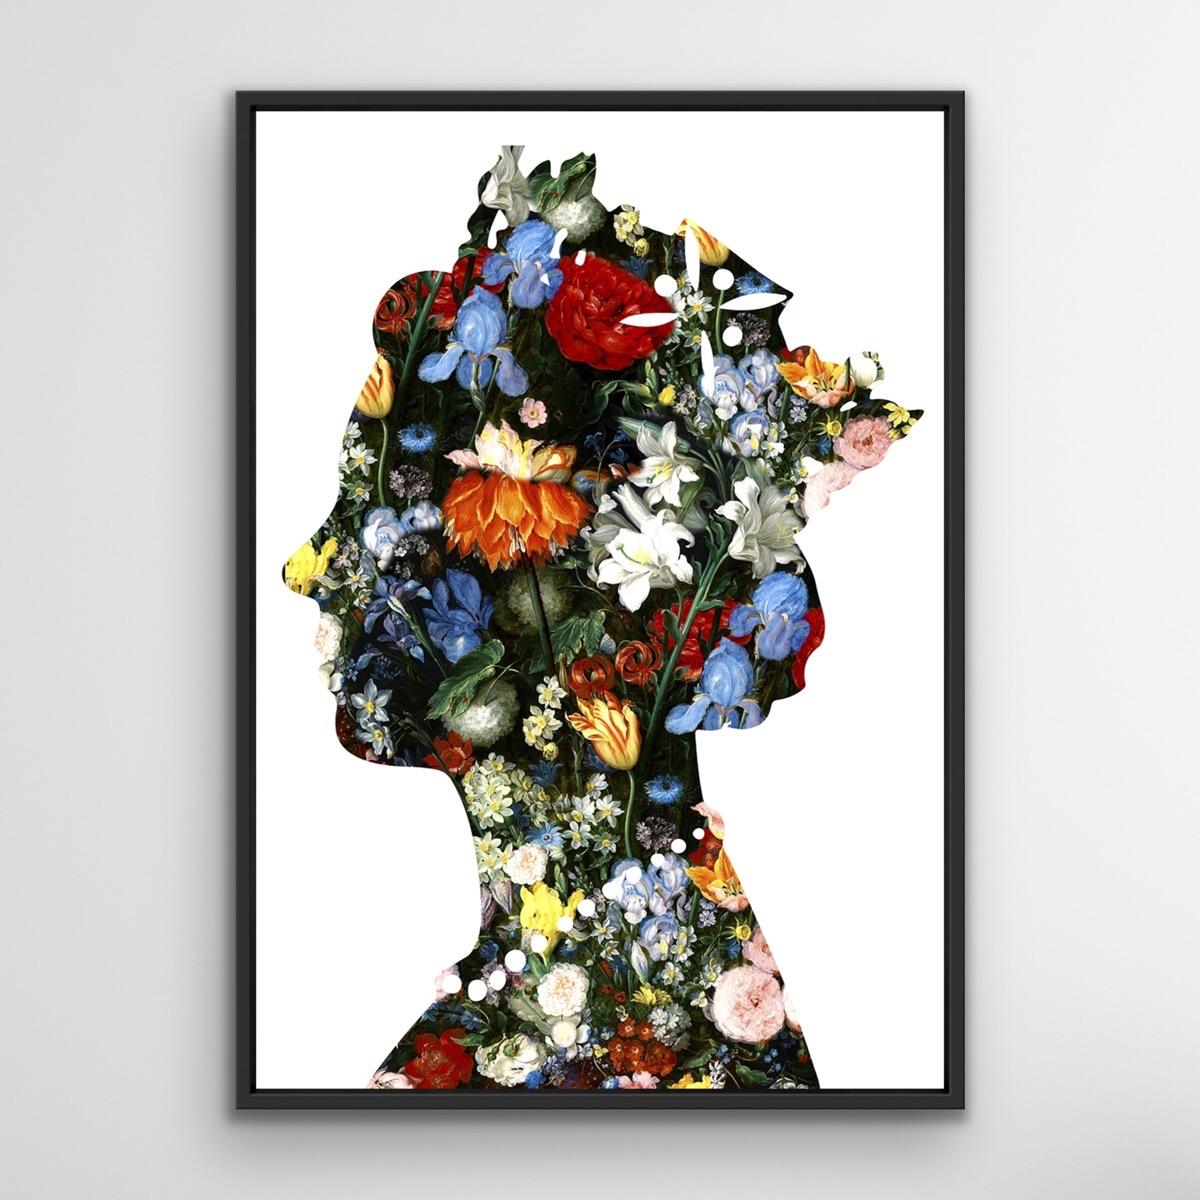 One Queen (17) is an Original on Canvas by Agent. ’One Queen (17)depicts silhouette of the Queen. 
Agent X digital artworks available with Wychwood Art online and in our gallery. Agent X creates the illusion of a cut-out to reveal a Baroque, floral